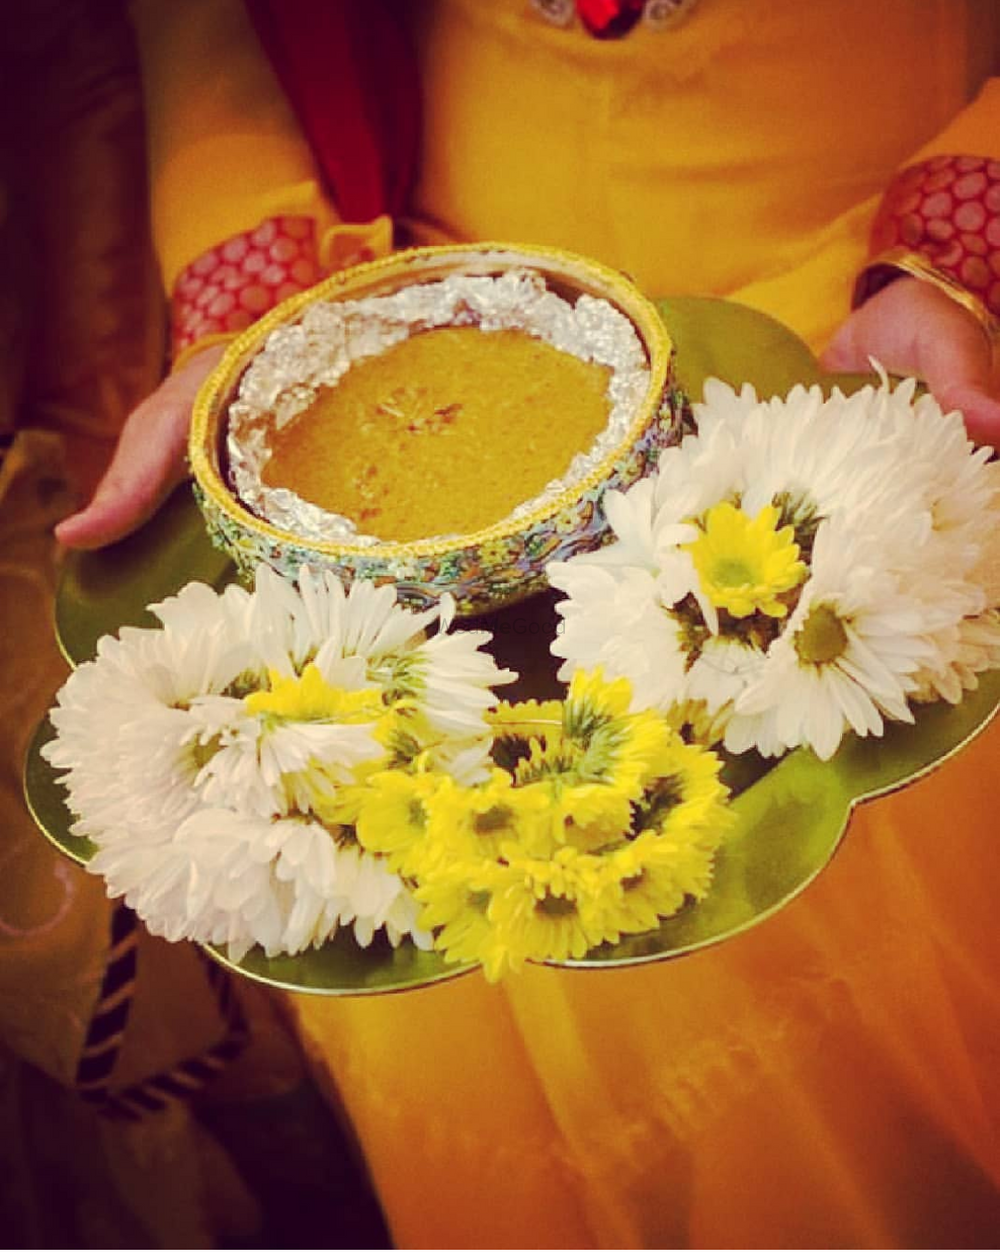 Photo From Mehendi, Haldi & Sangeet Function - By Beanfest- An Event Co.